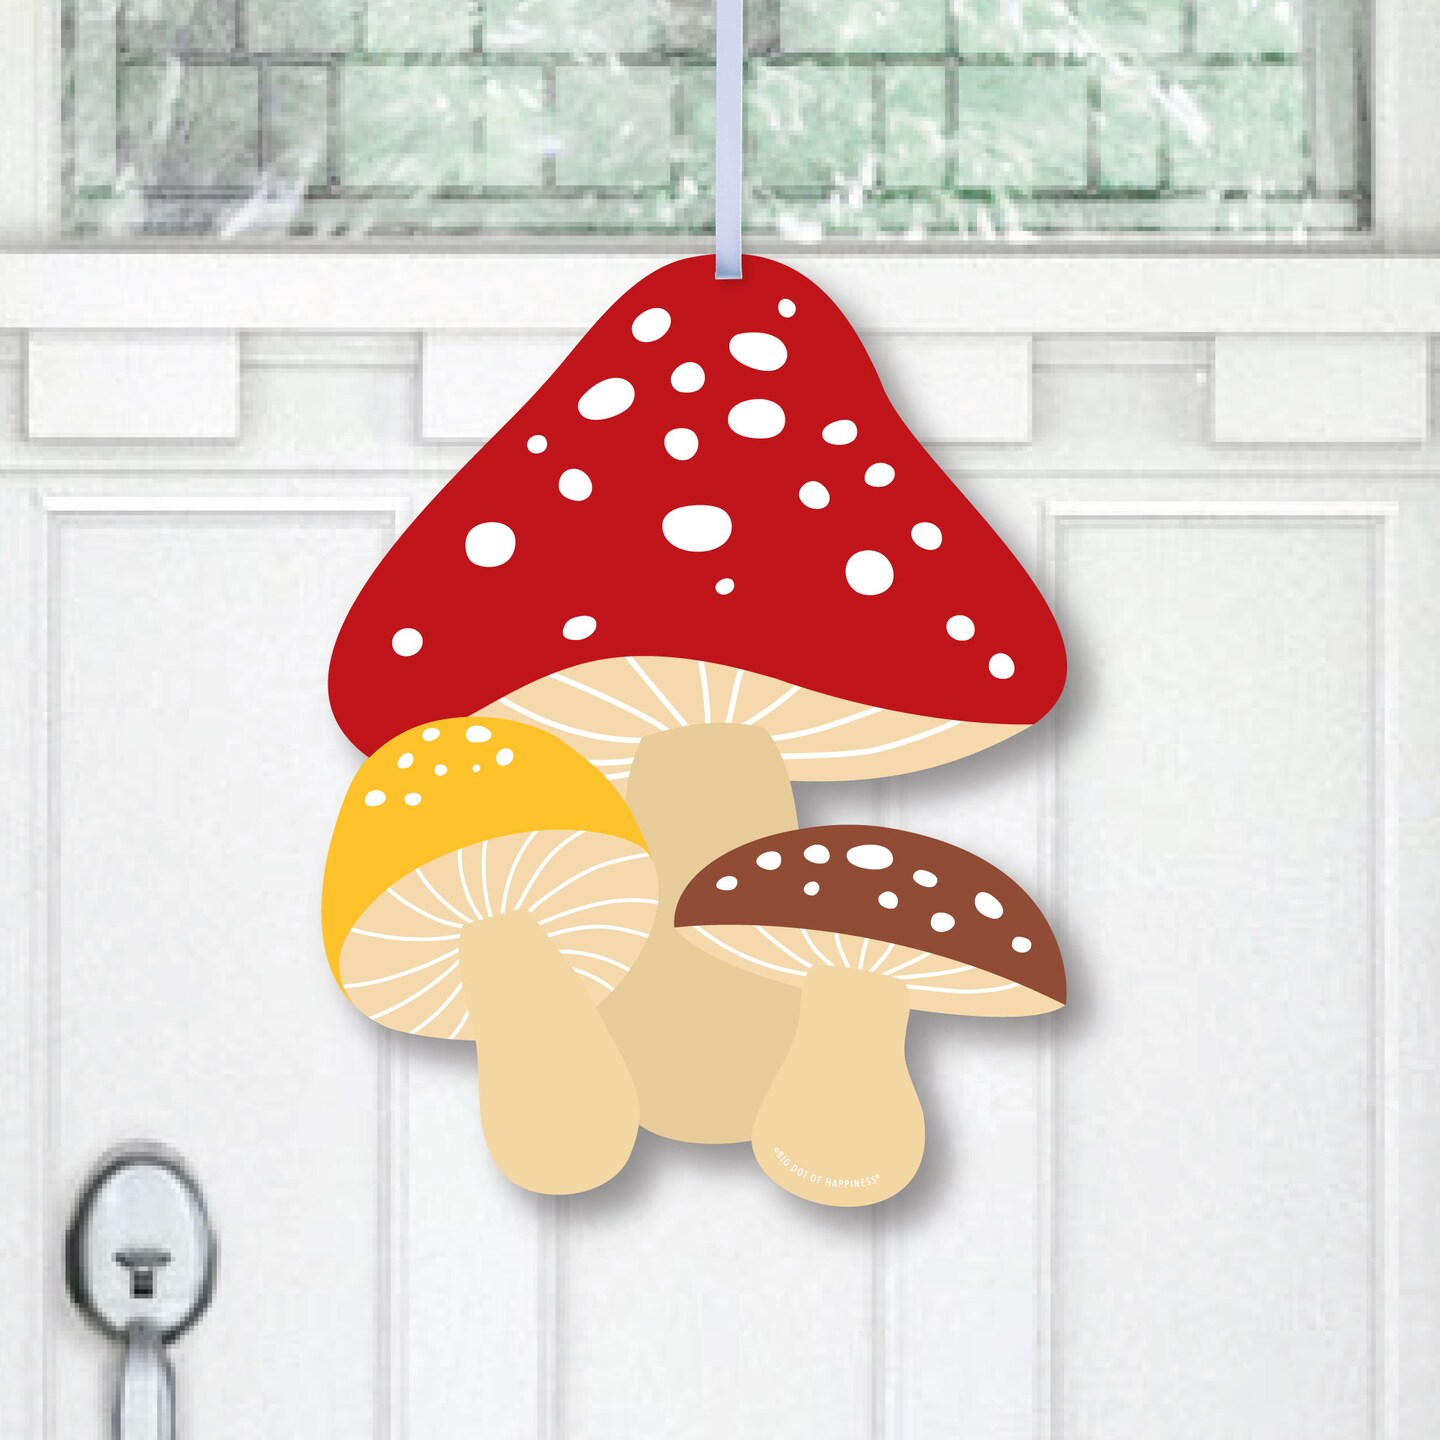 Big Dot of Happiness Wild Mushrooms - Hanging Porch Red Toadstool Decor and Party Outdoor Decorations - Front Door Decor - 1 Piece Sign